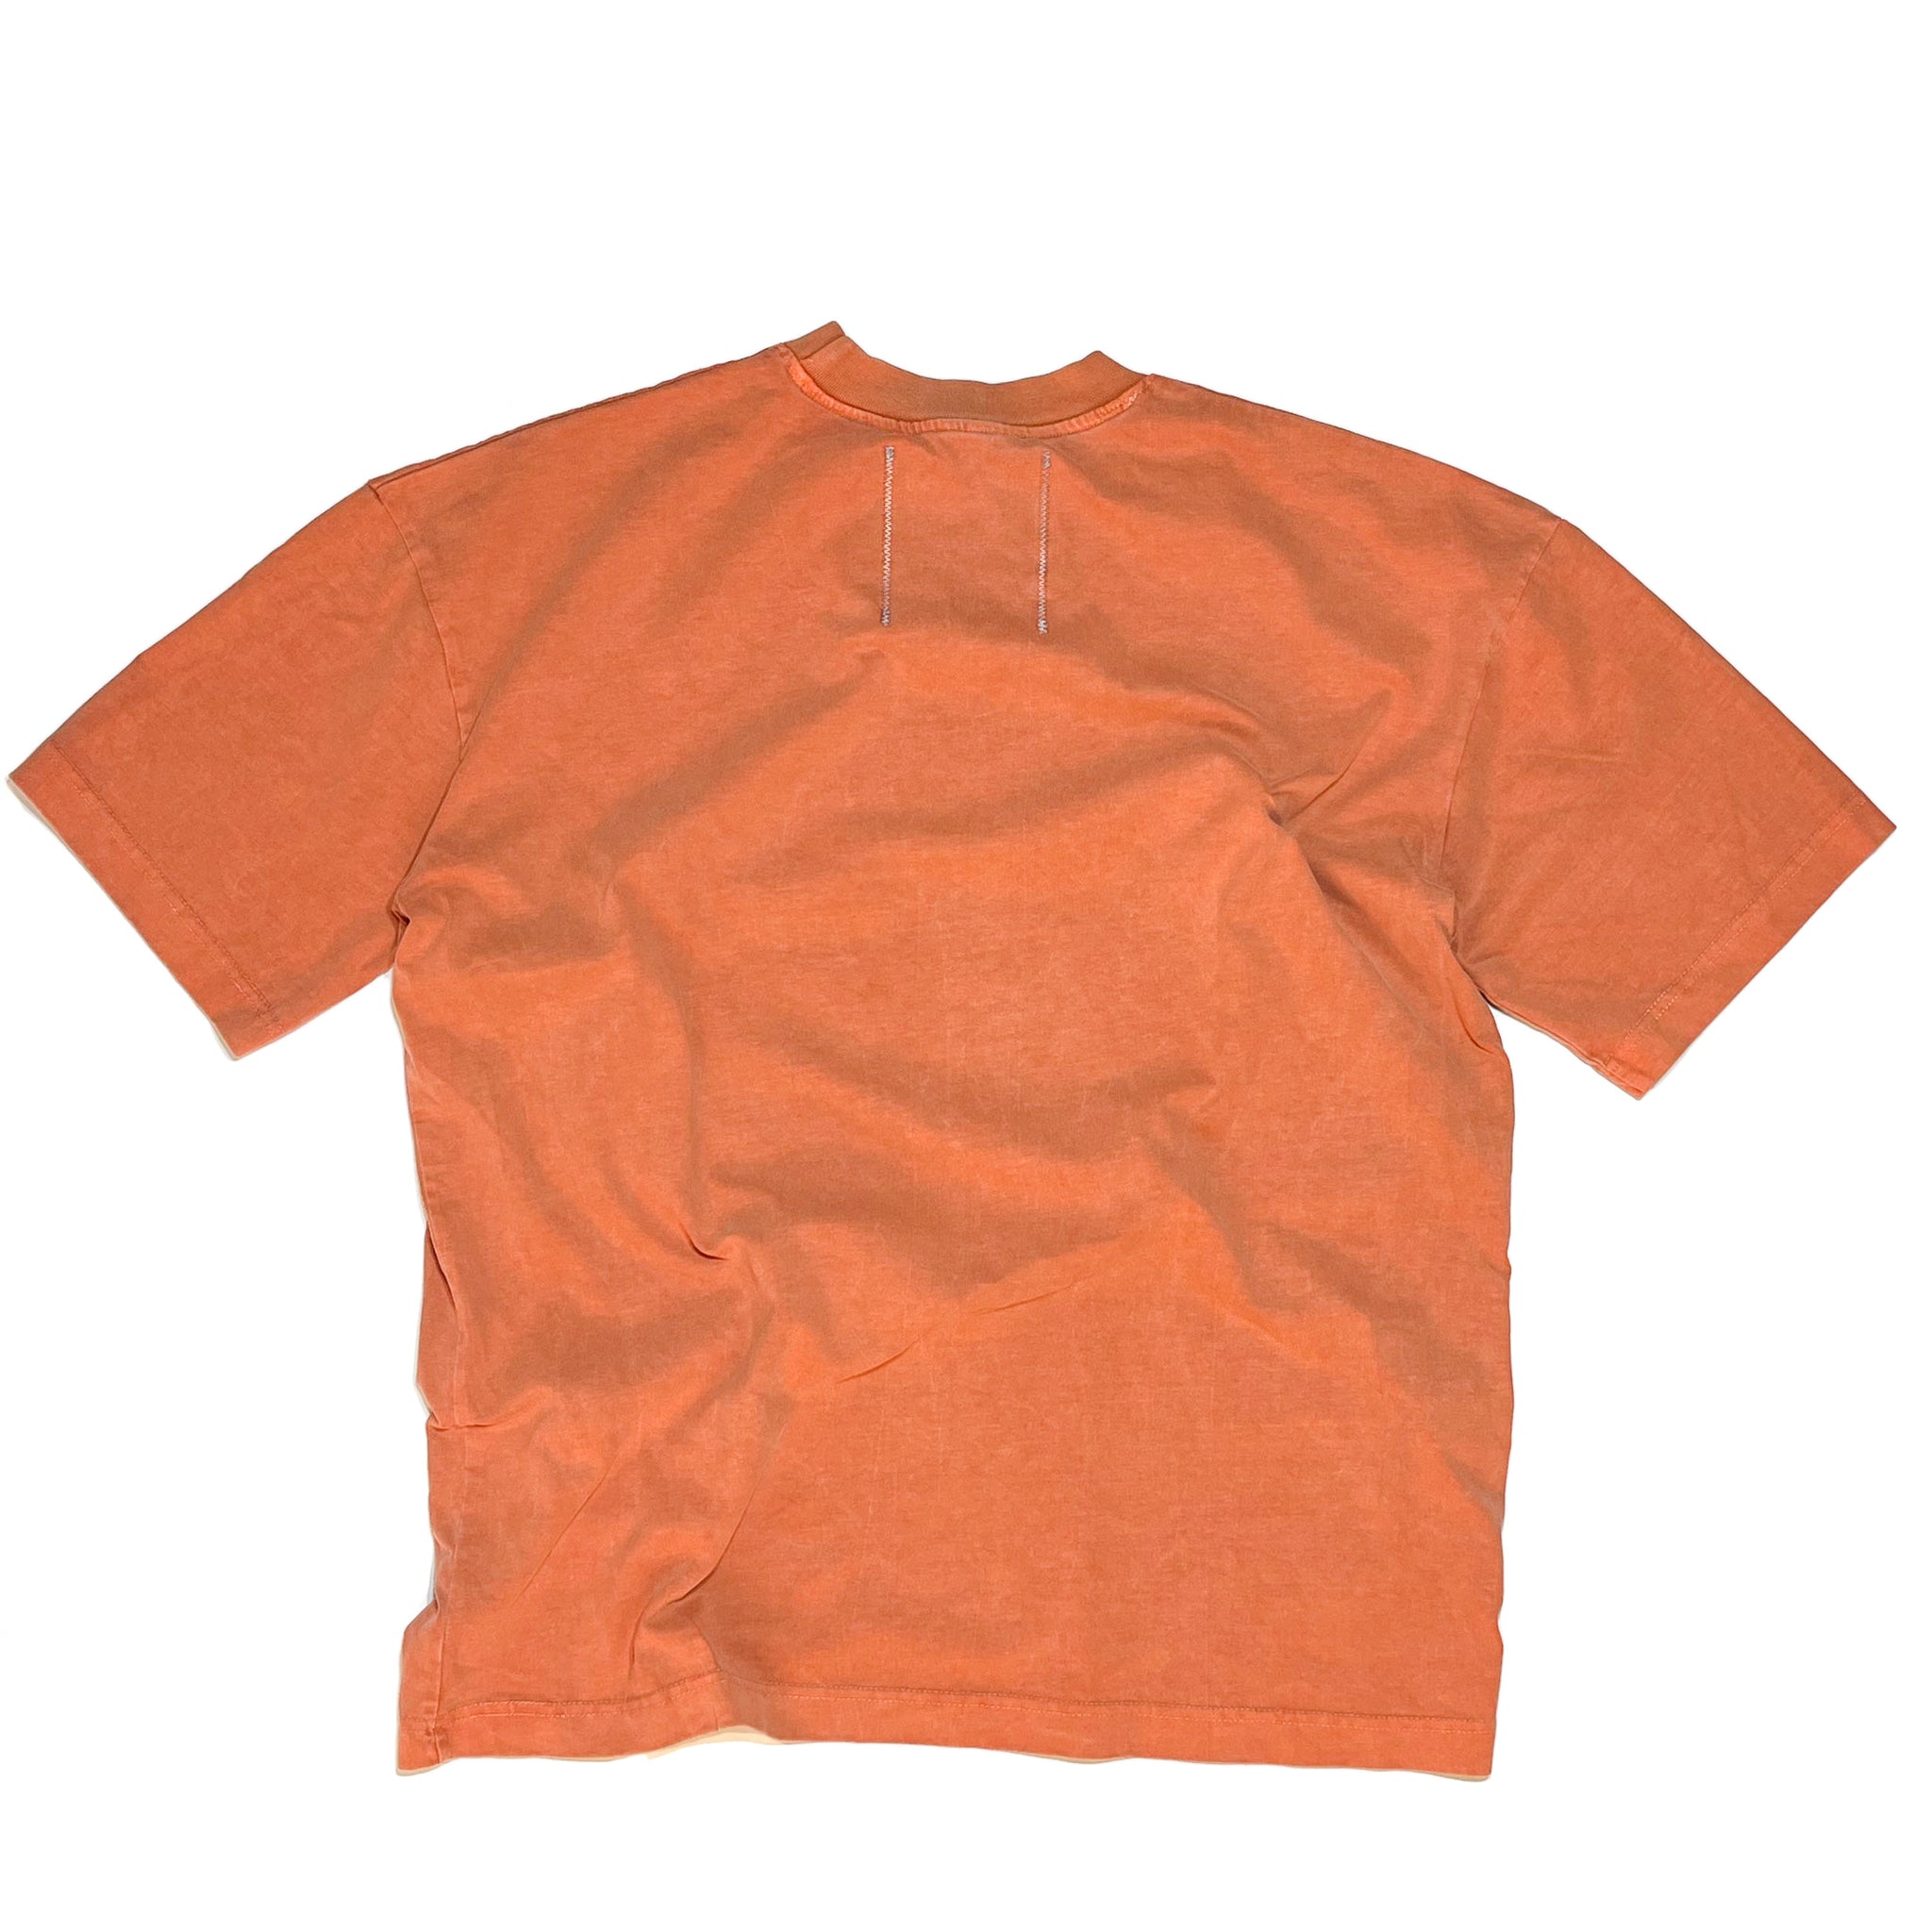 Out Of Joint x Crud Heavy Weight T-Shirt Marmalade